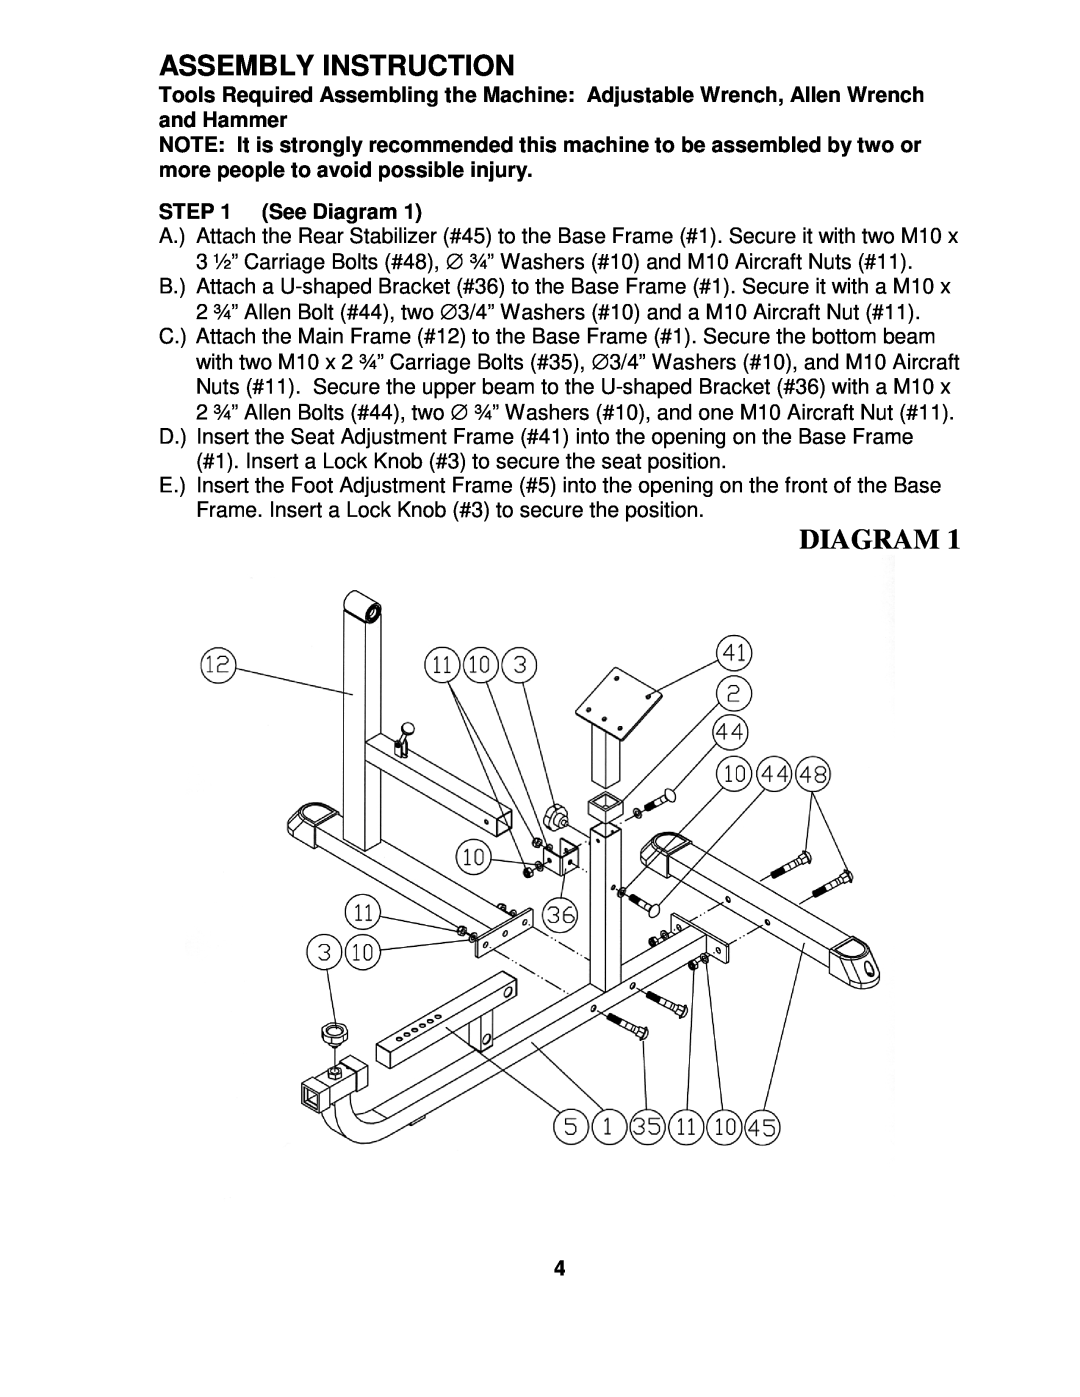 Impex IGS-10 manual Assembly Instruction, Diagram 